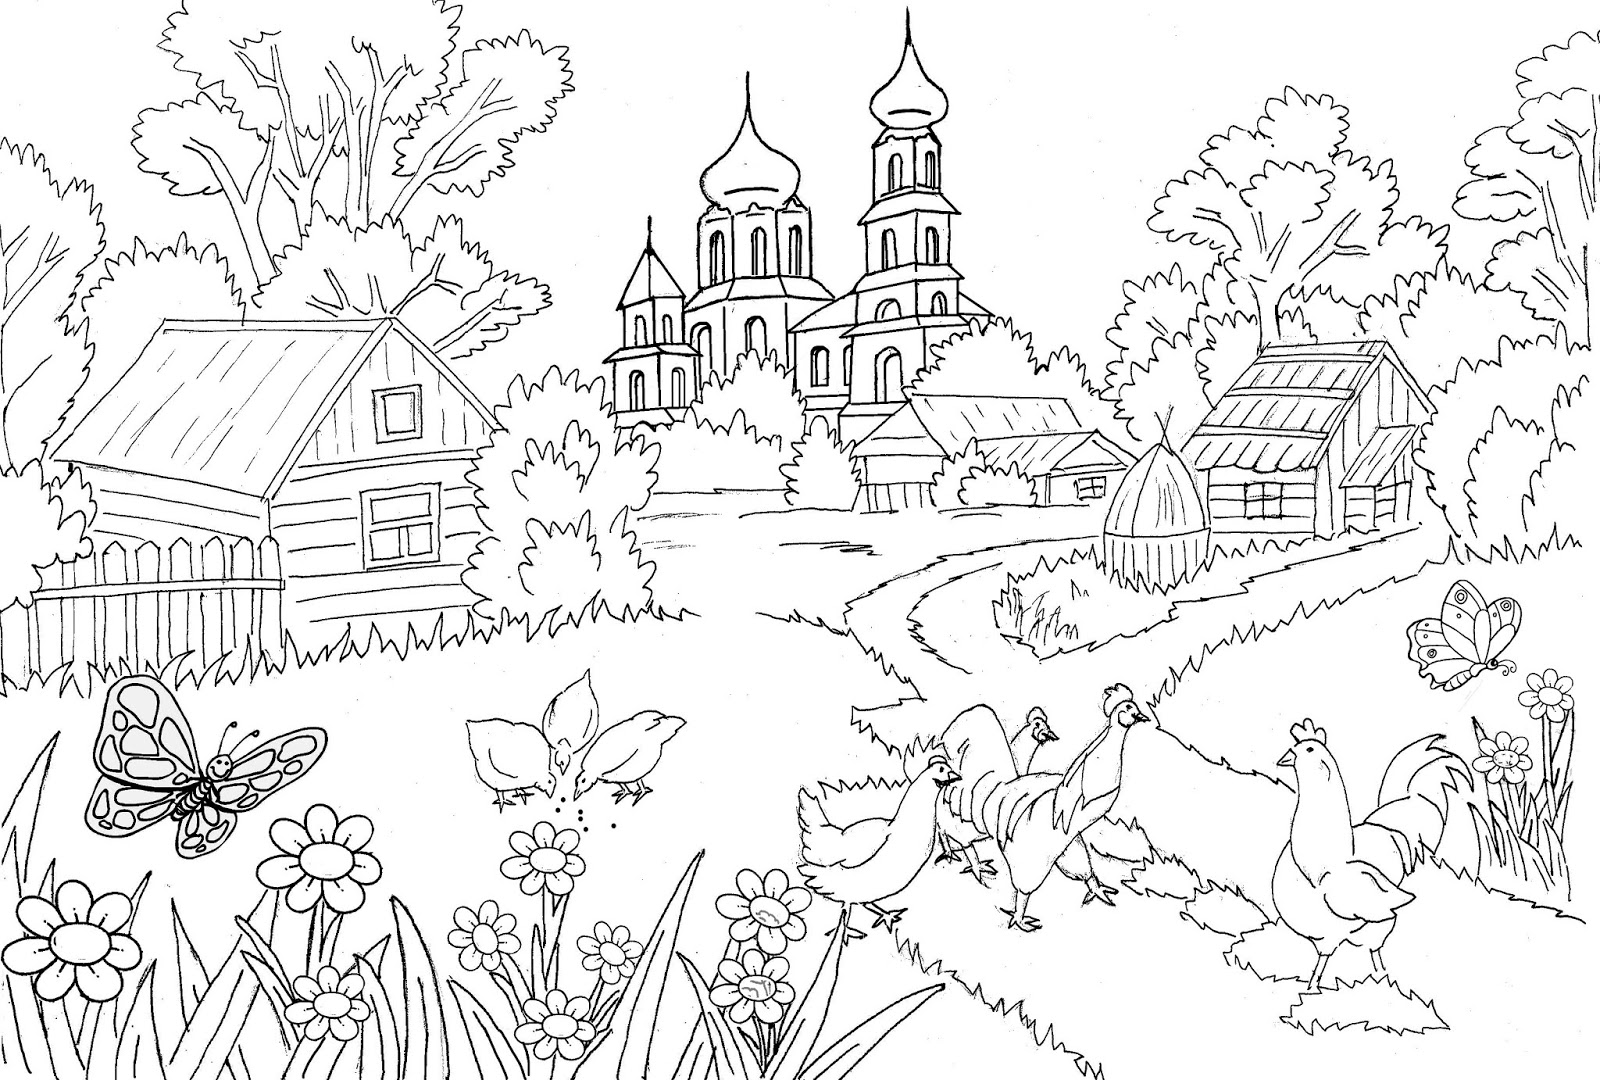 Scenery Coloring Pages For Adults | Collection Images